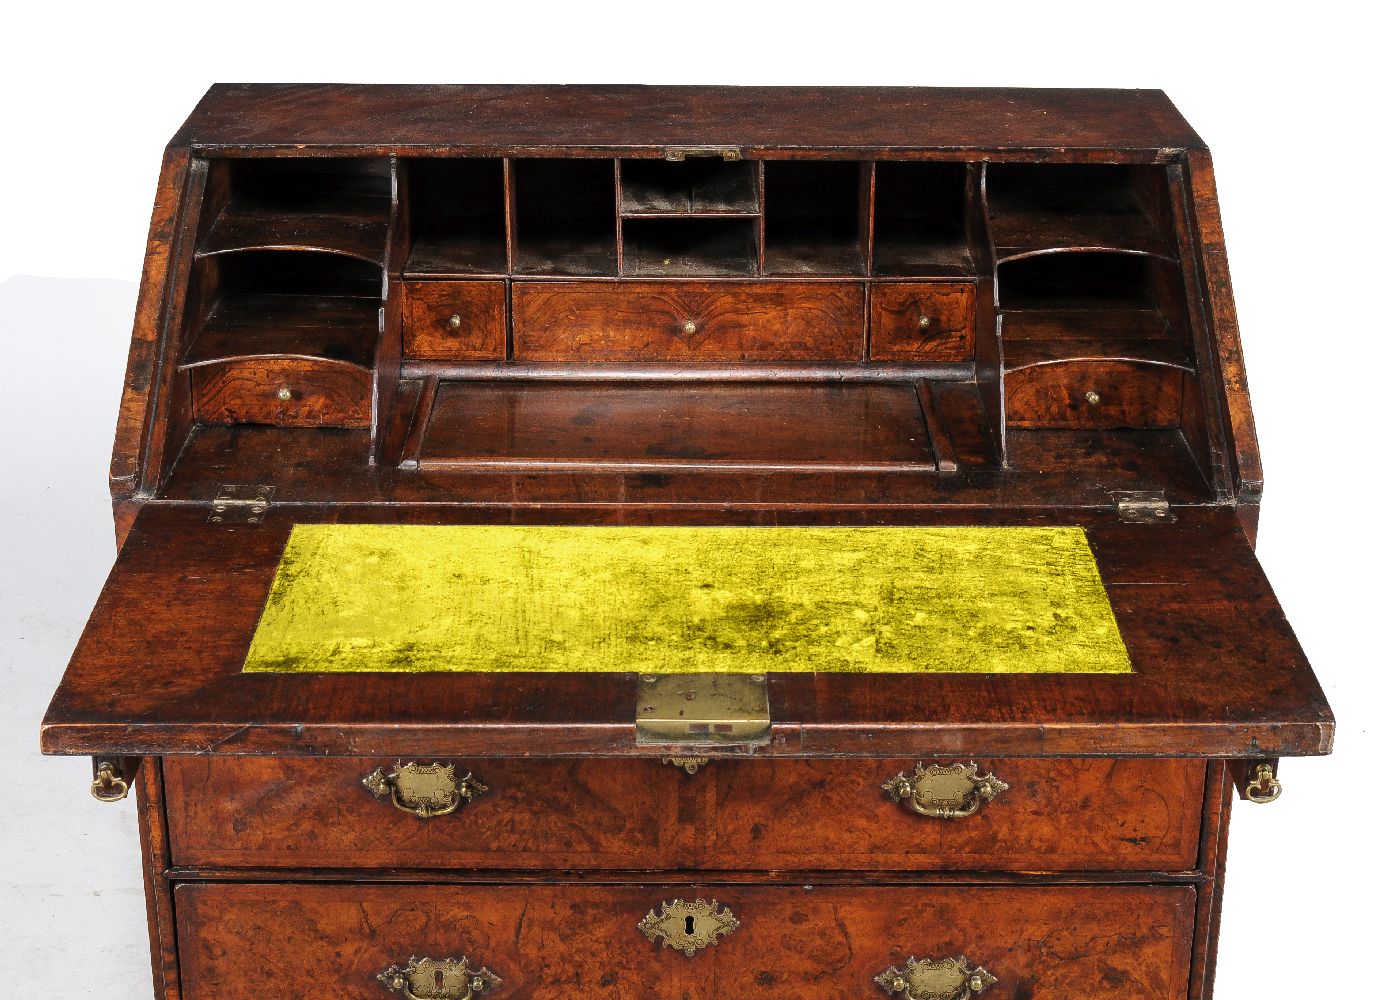 A Queen Anne walnut bureau, circa 1705, the fall enclosing an arrangement of drawers and pigeonholes - Image 3 of 3